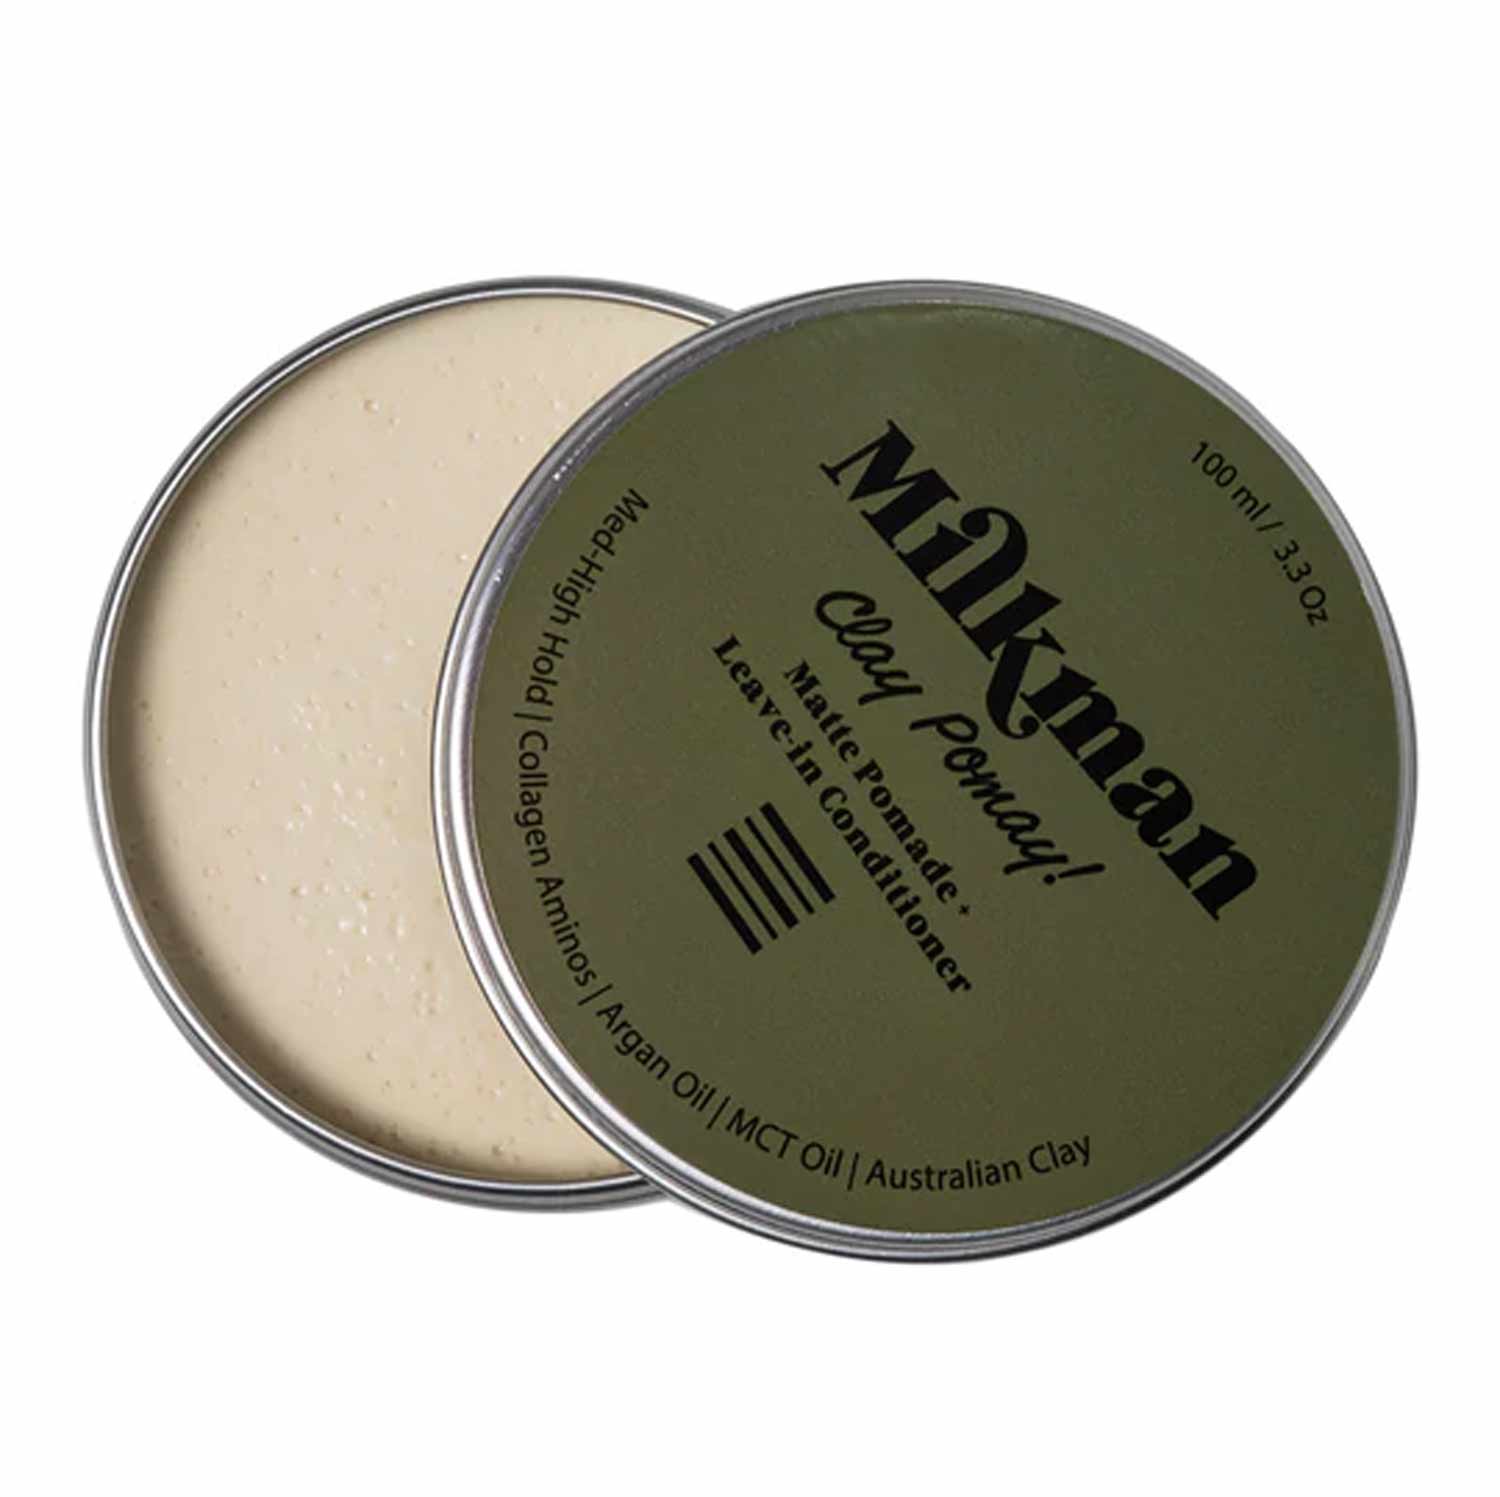 Milkman Matte Clay Pomade 100ml | Medium to High Hold, Matte Pomade - Orcadia